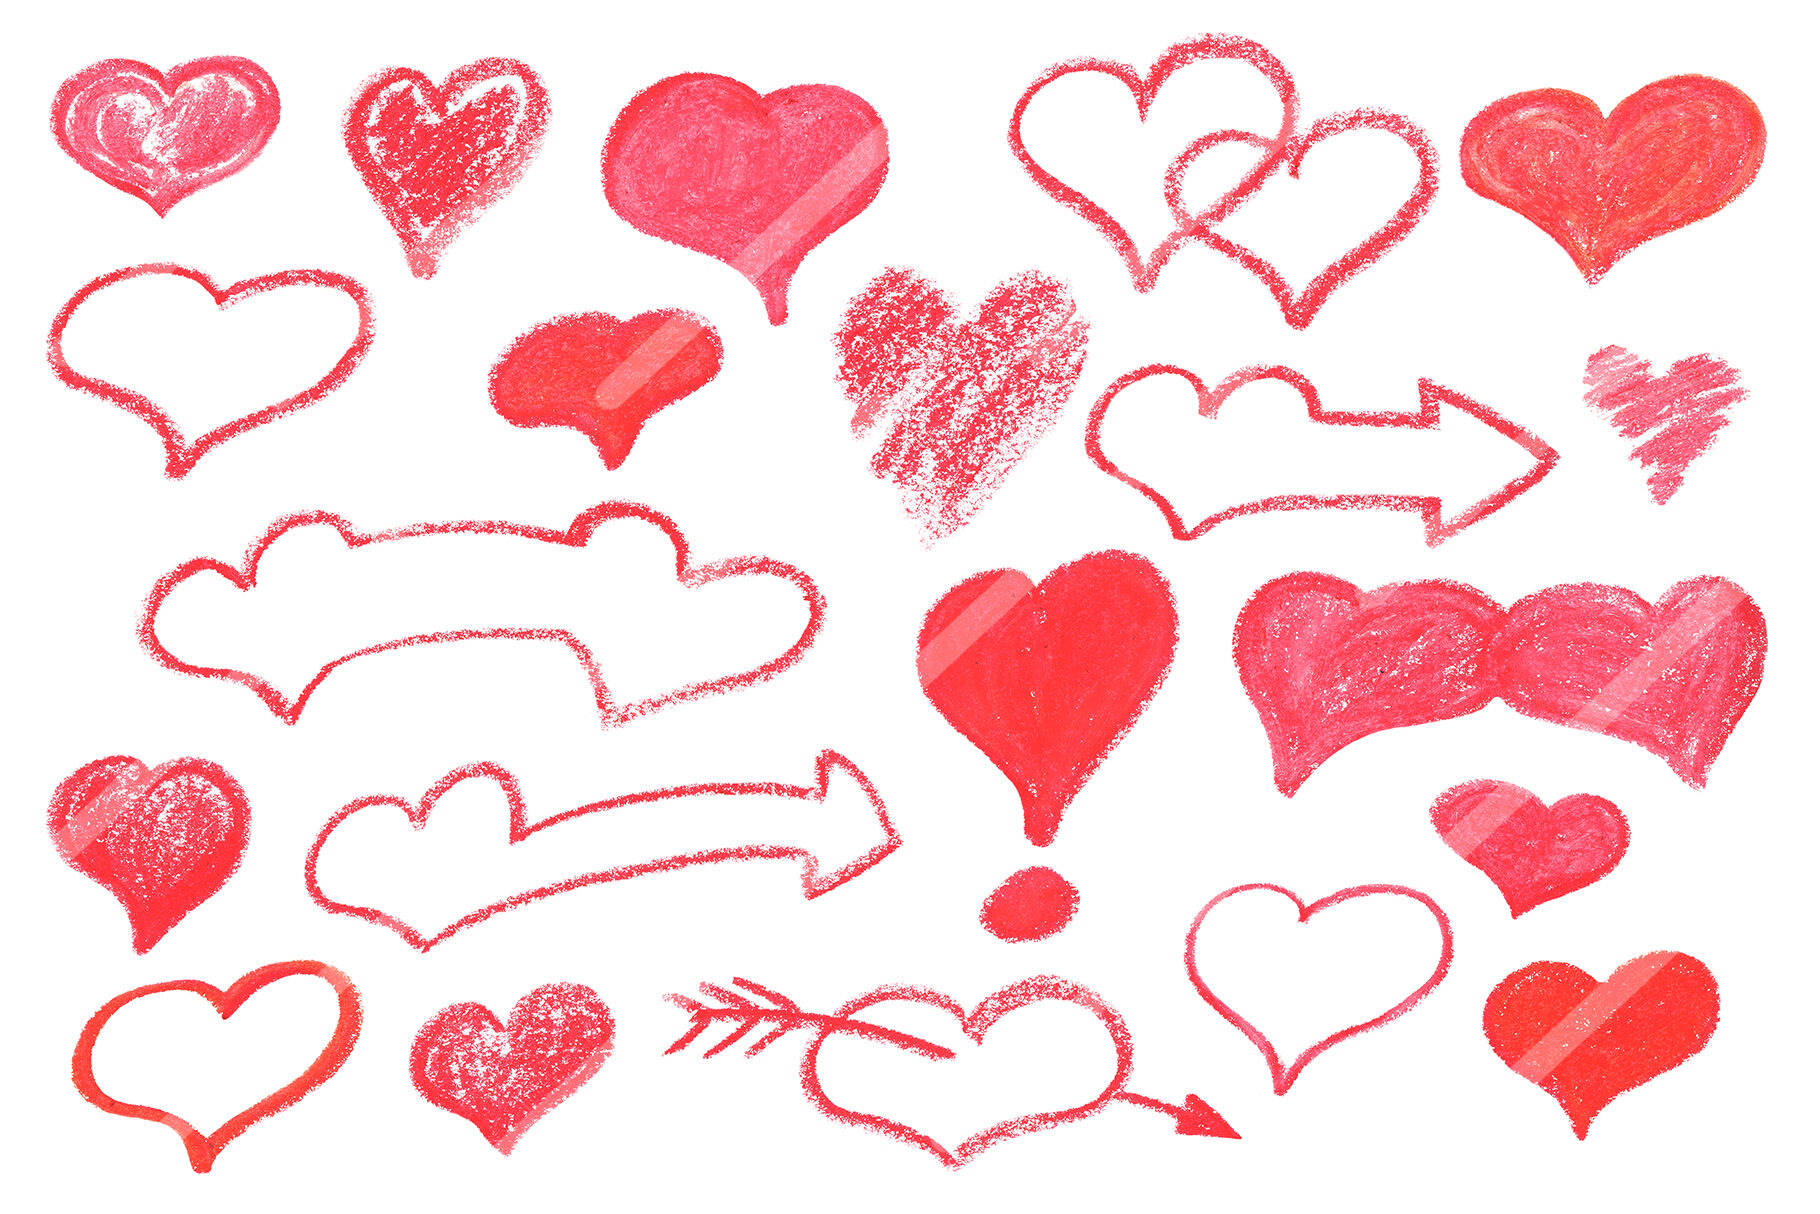 St Valentine Hearts Crayon Or Chalk Handdrawn Clipart By Rabbit And Pencil Thehungryjpeg Com